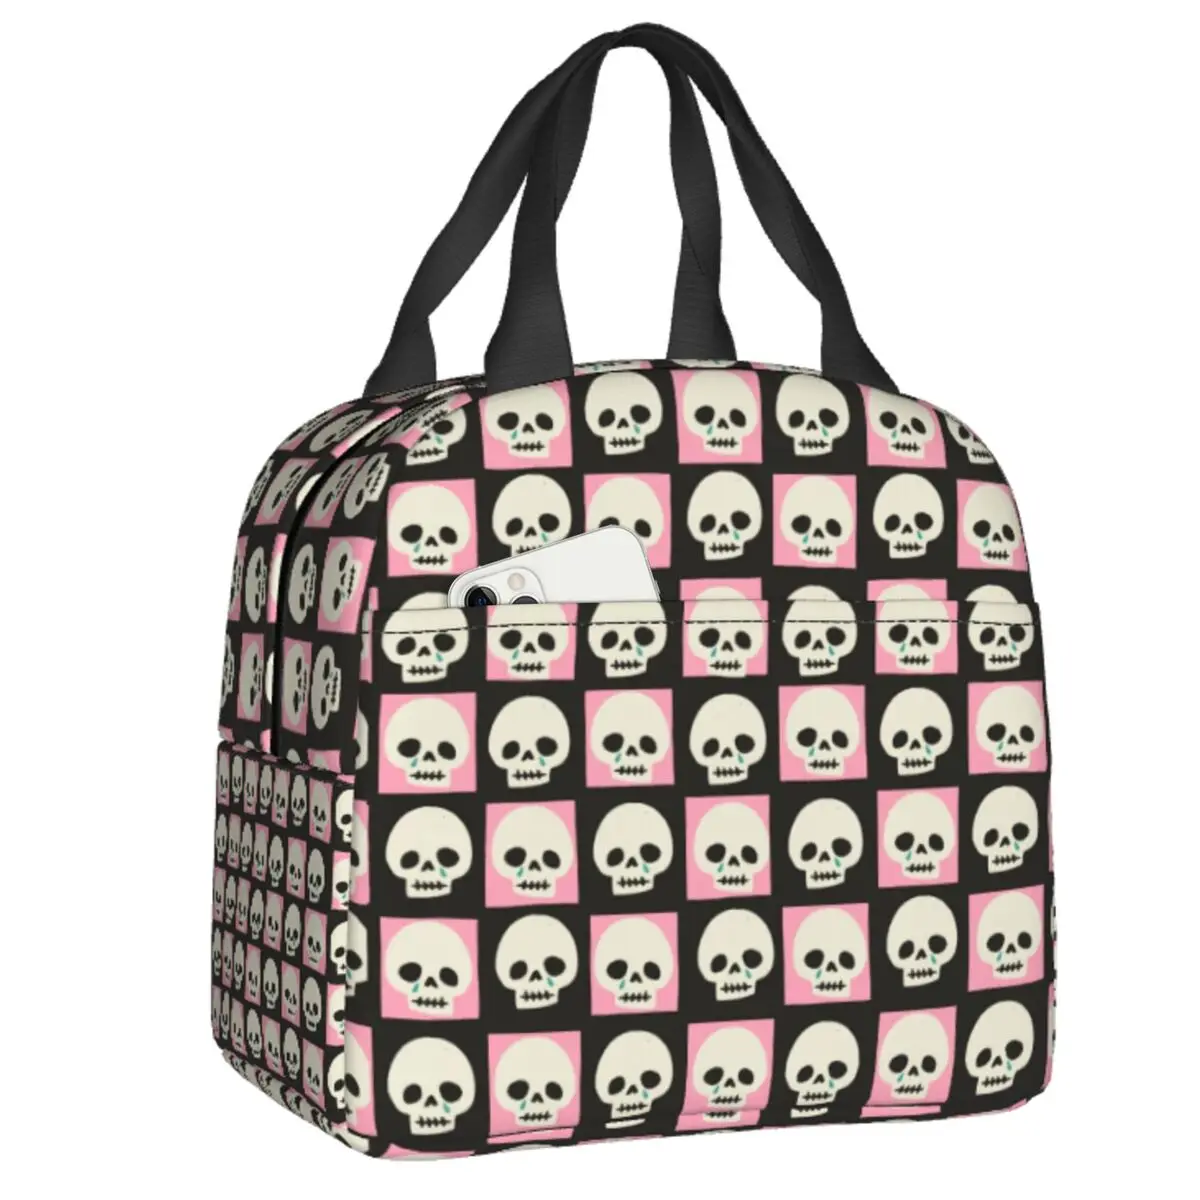 

Checkerboard Skulls Pattern Insulated Lunch Bag for Women Leakproof Checkered Cooler Thermal Bento Box Office Picnic Travel